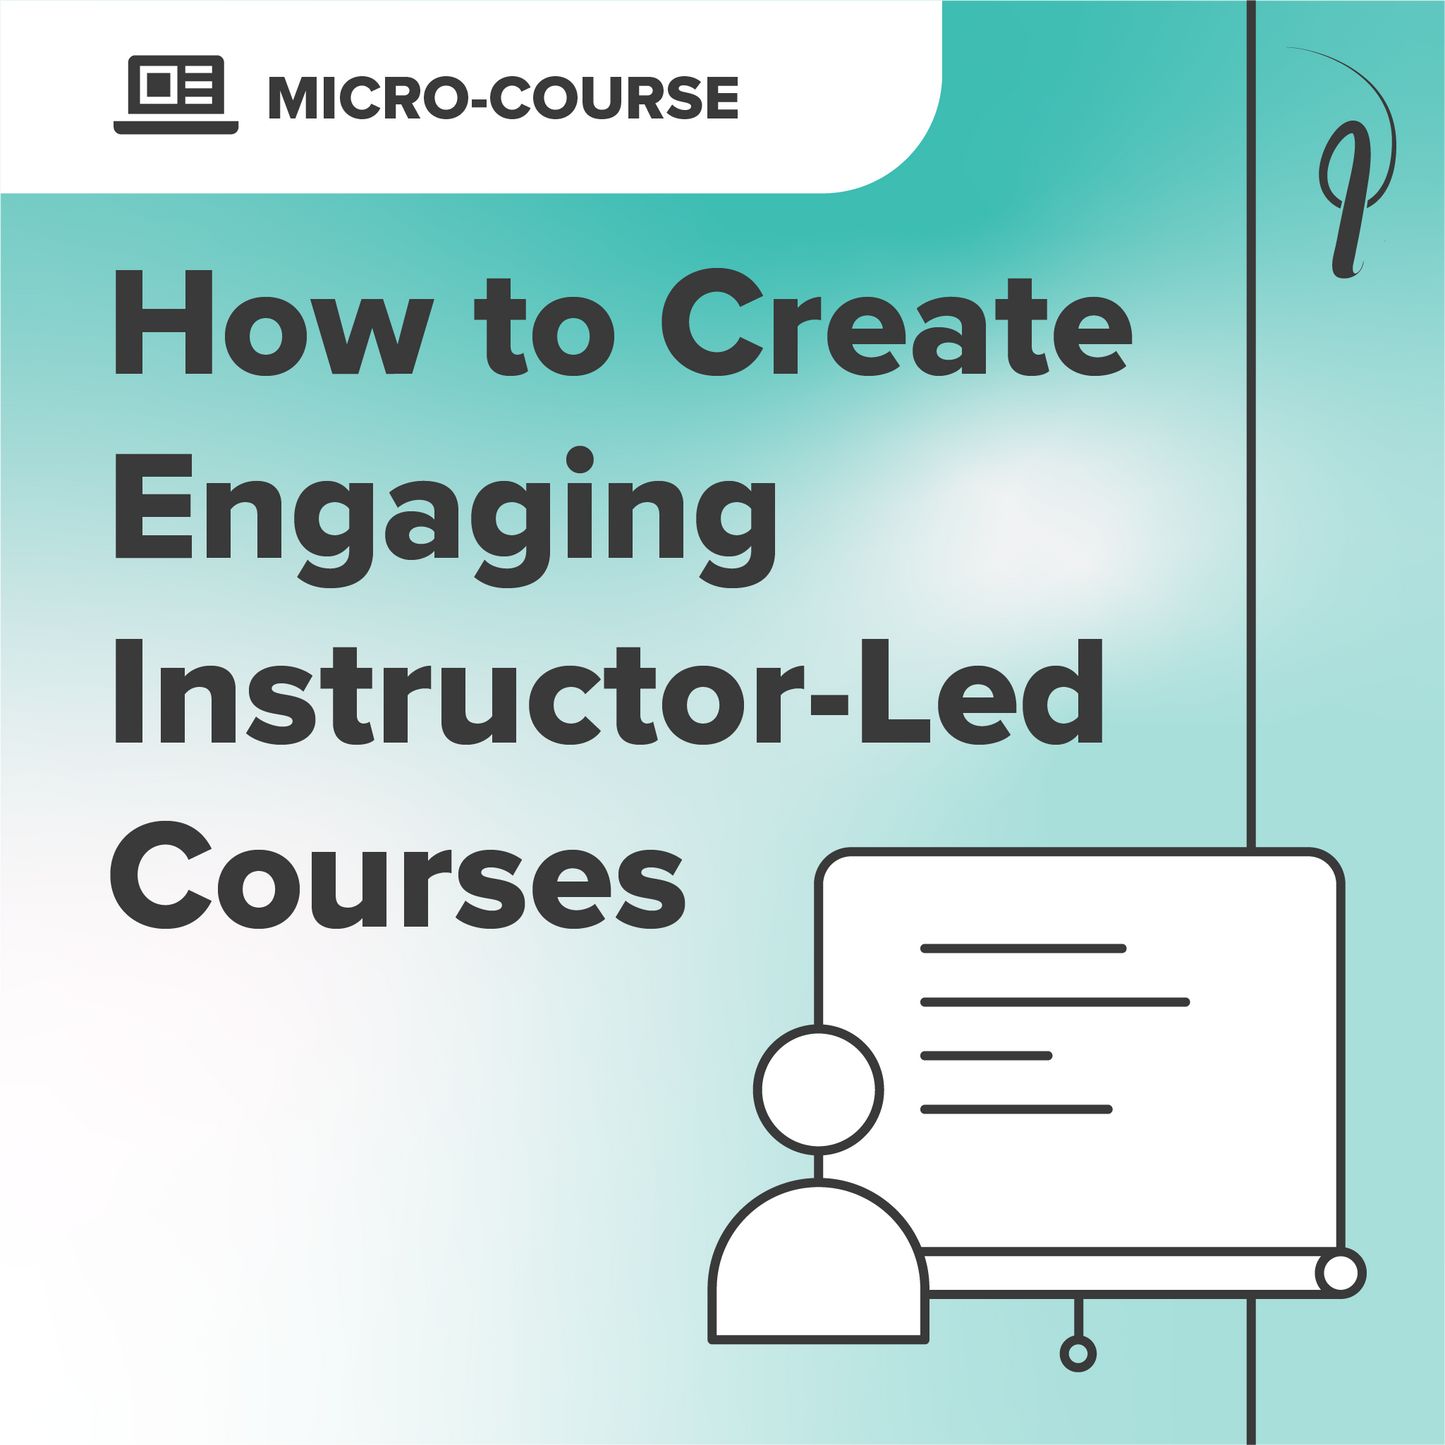 How to Create Engaging Instructor-Led Courses - Micro-course